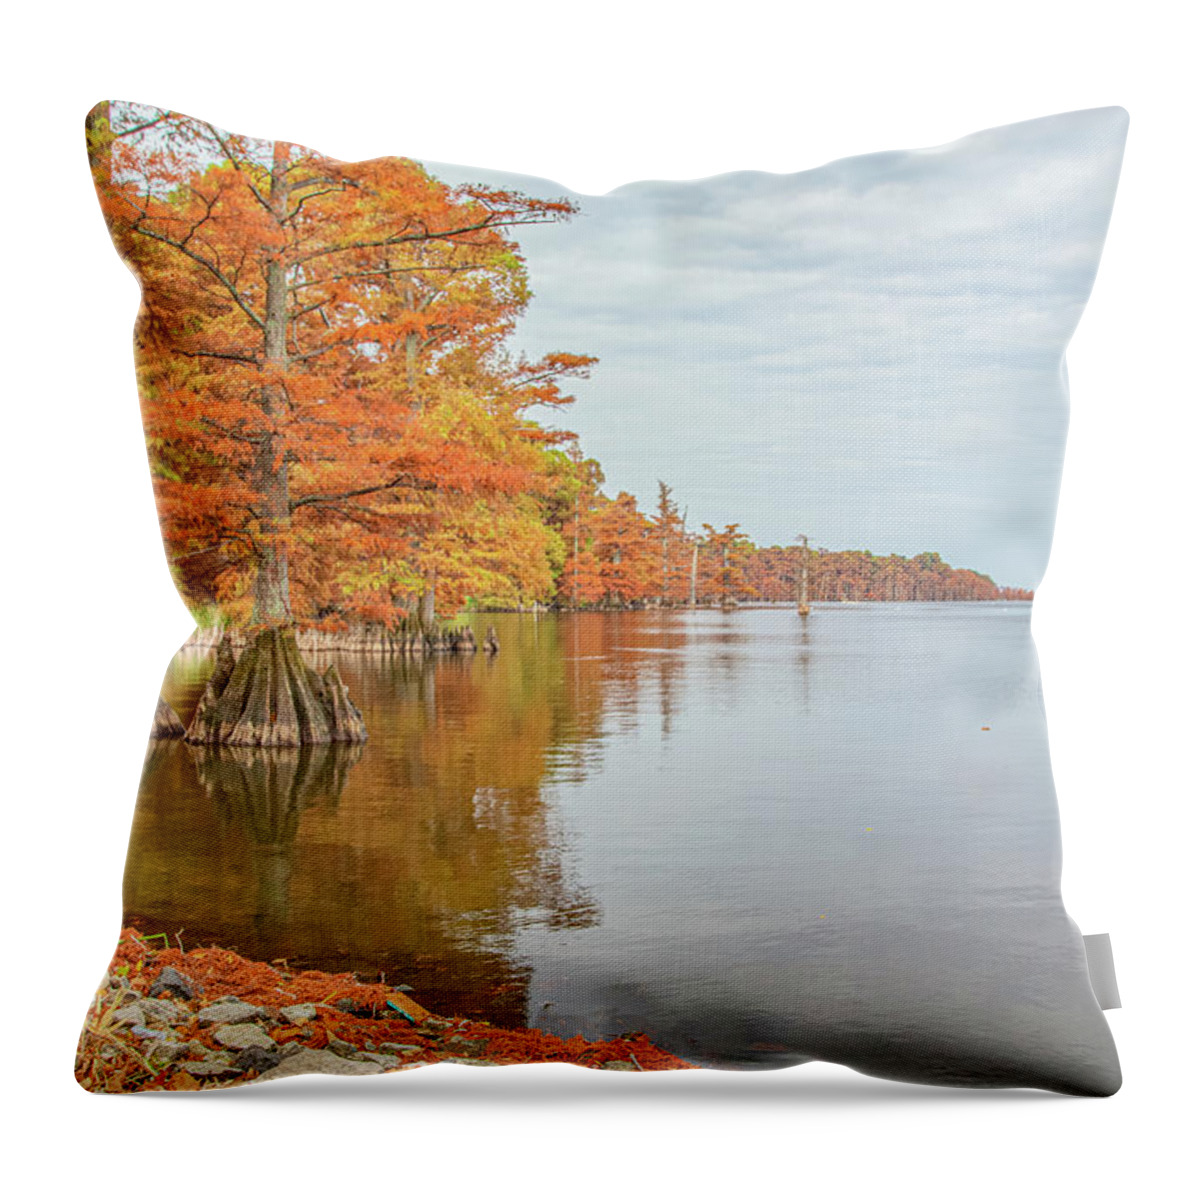 Cypress Trees Throw Pillow featuring the photograph Reelfoot Lake 37 by Jim Dollar